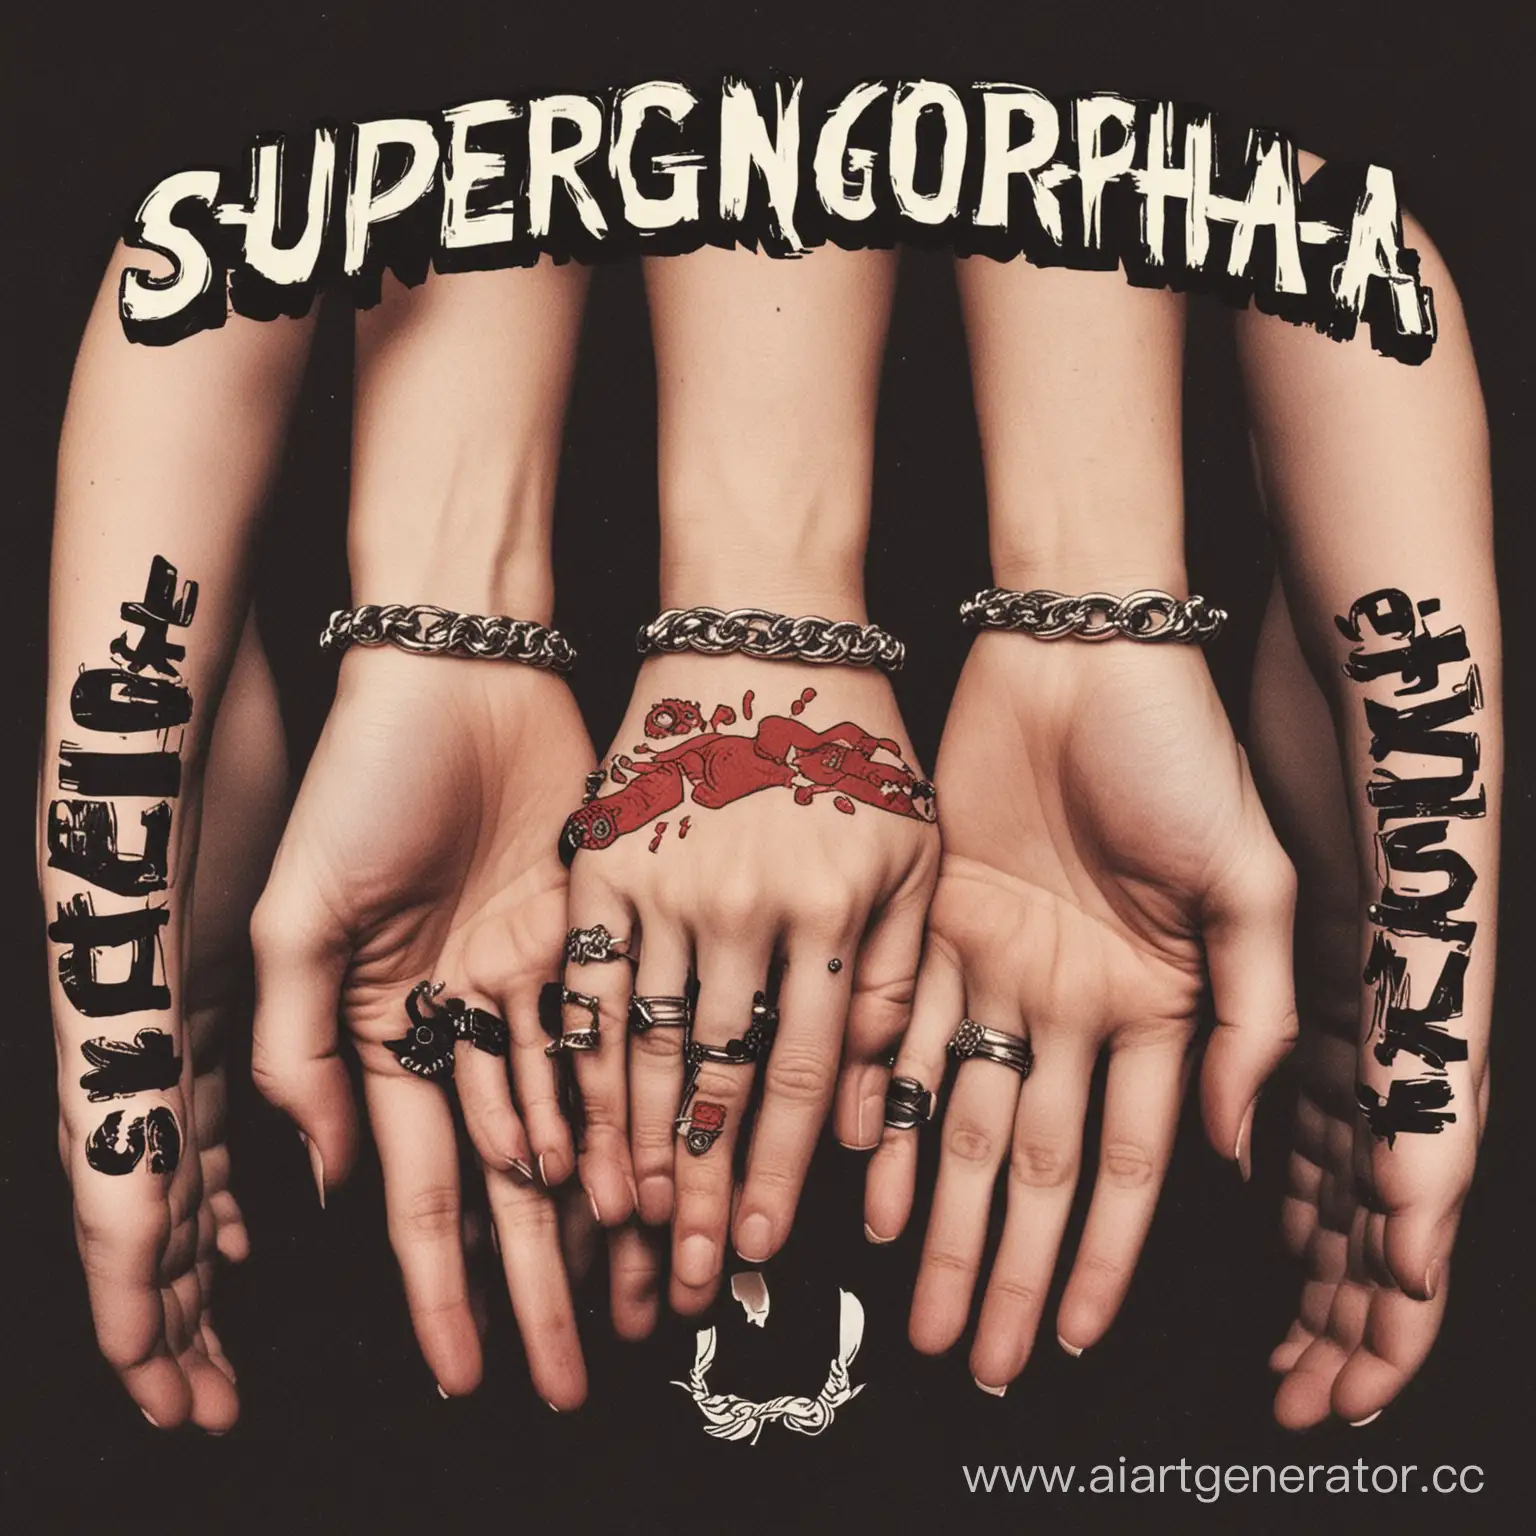 Supergonorrhea-Punk-Band-Members-Holding-Hands